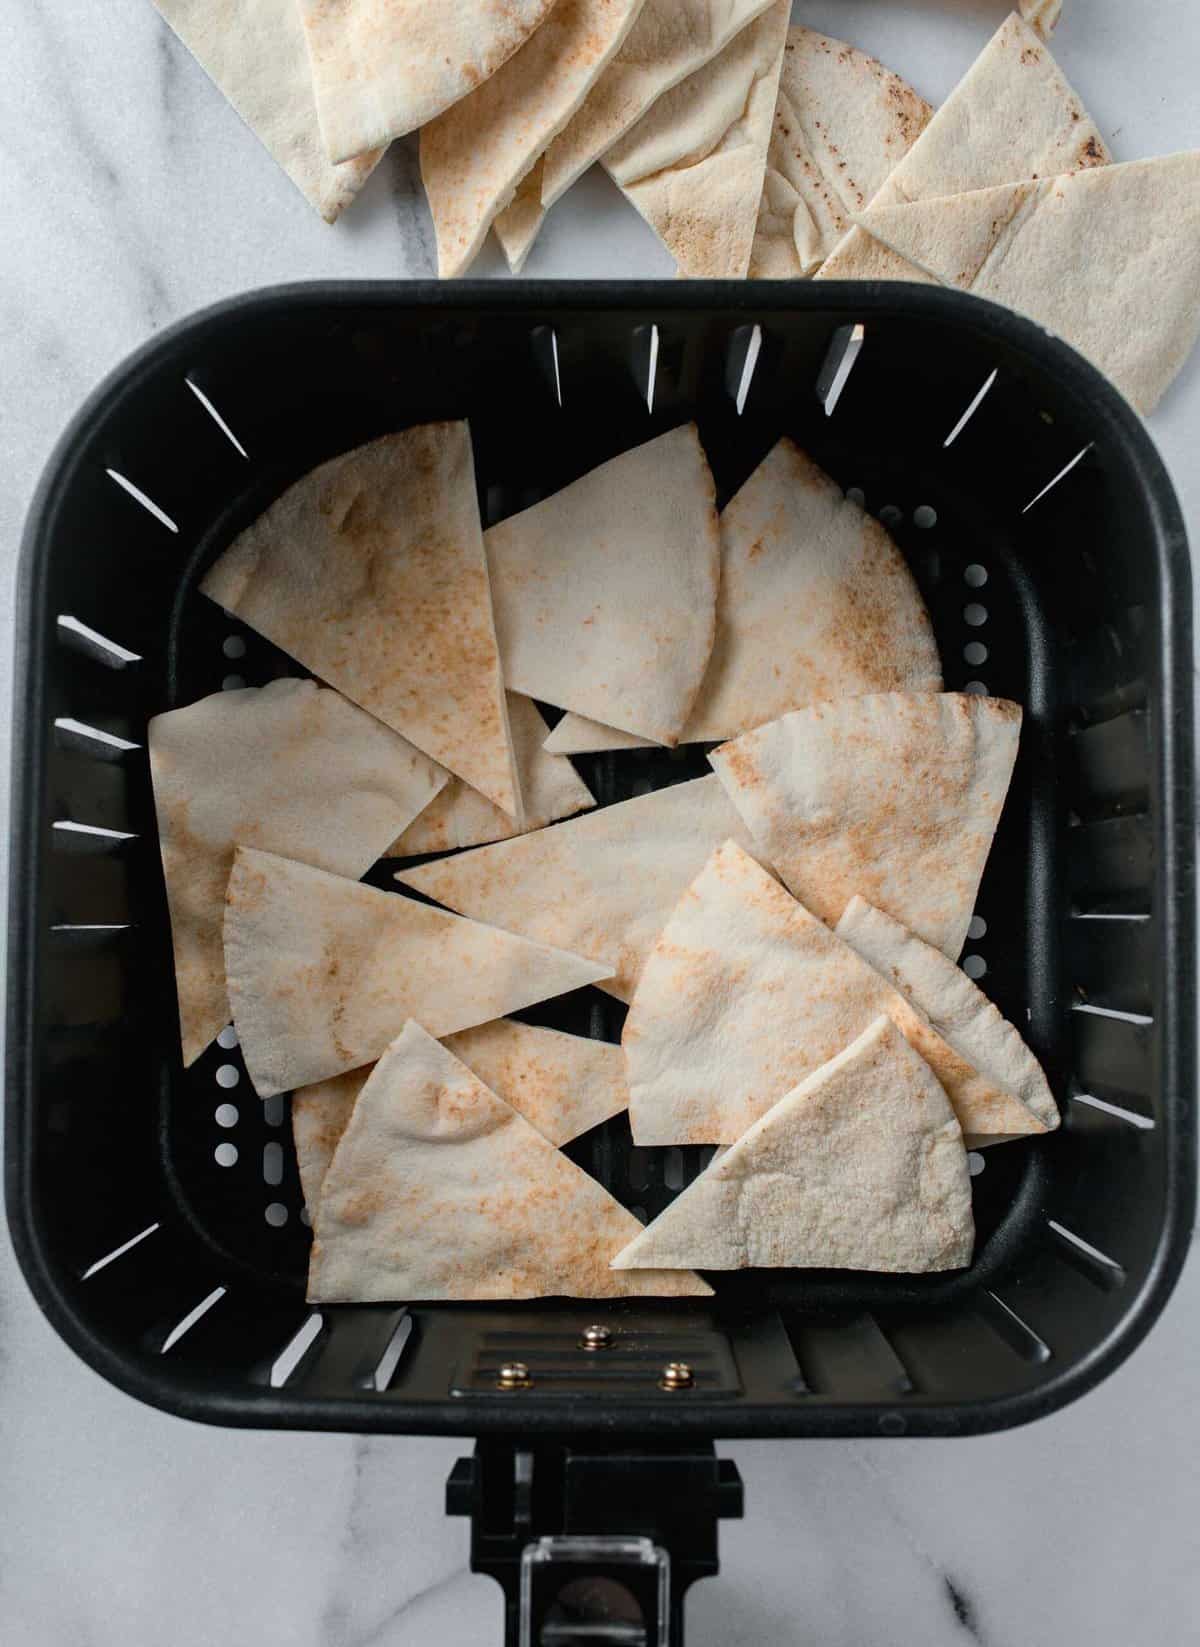 pita bread triangle slices in a basket of an air fryer